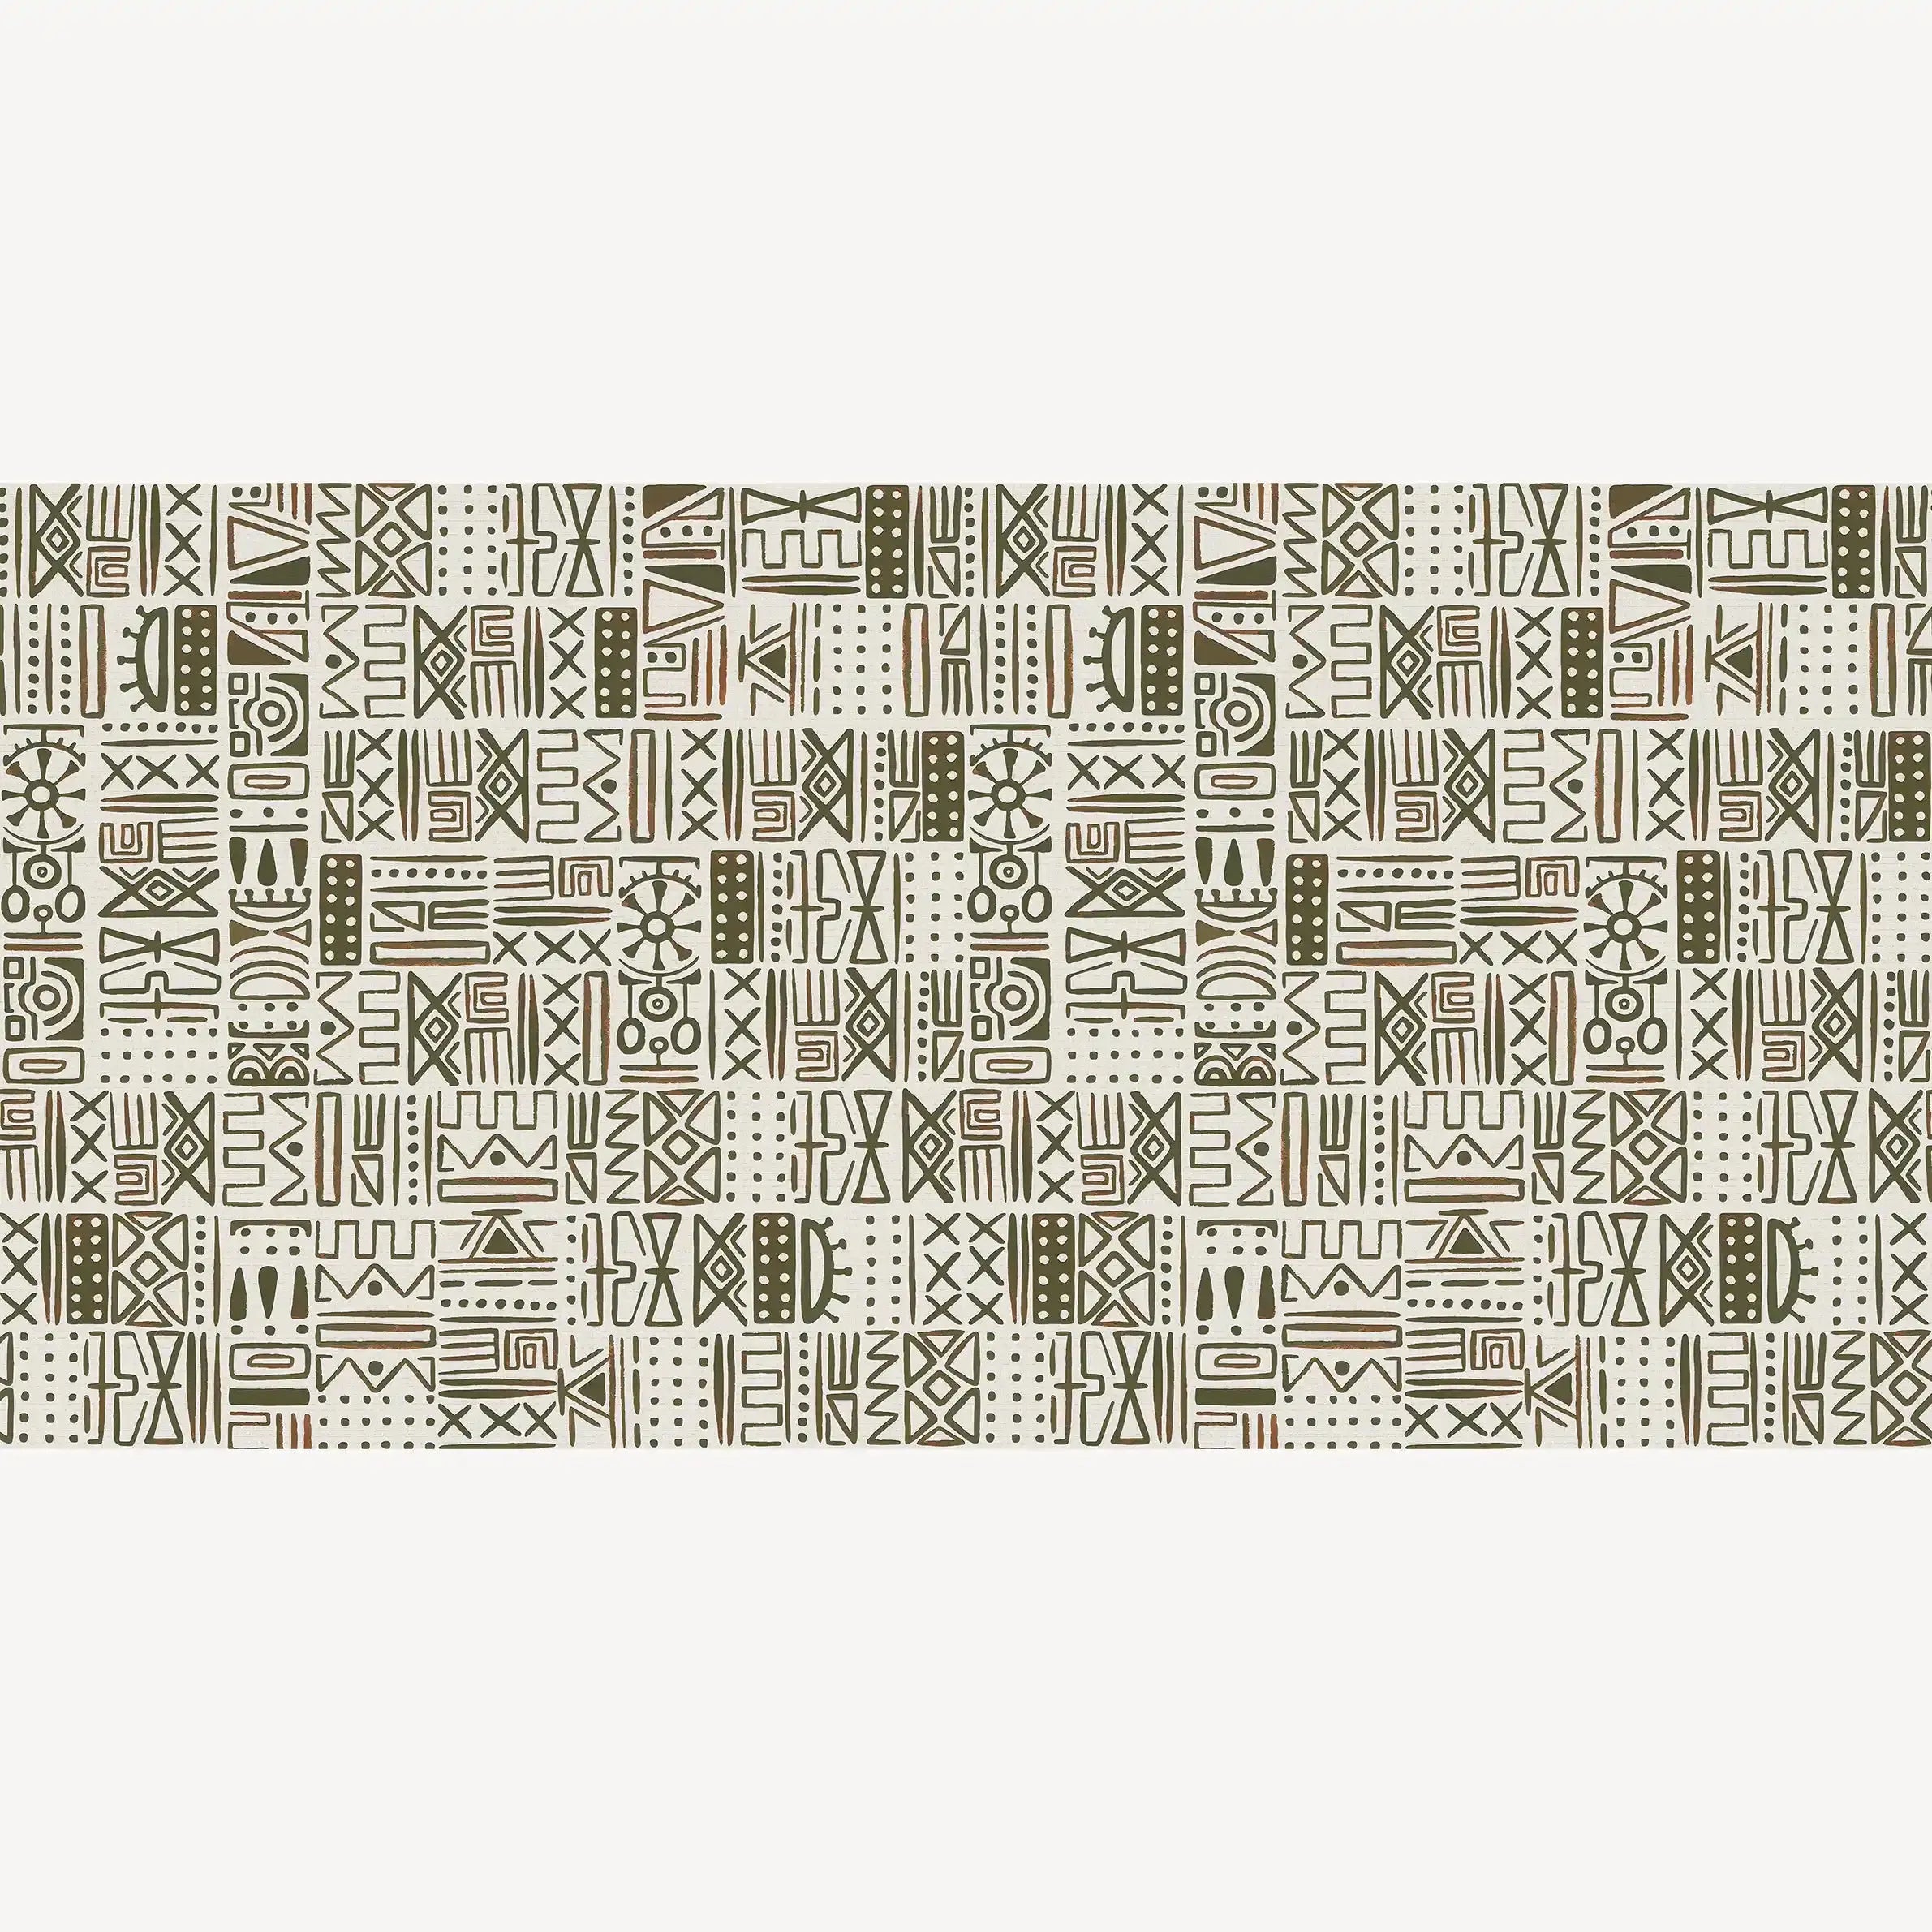 3030-C / African Inspired Peel and Stick Wallpaper, Geometric Khaki and Beige Patterns Wall Mural - Artevella